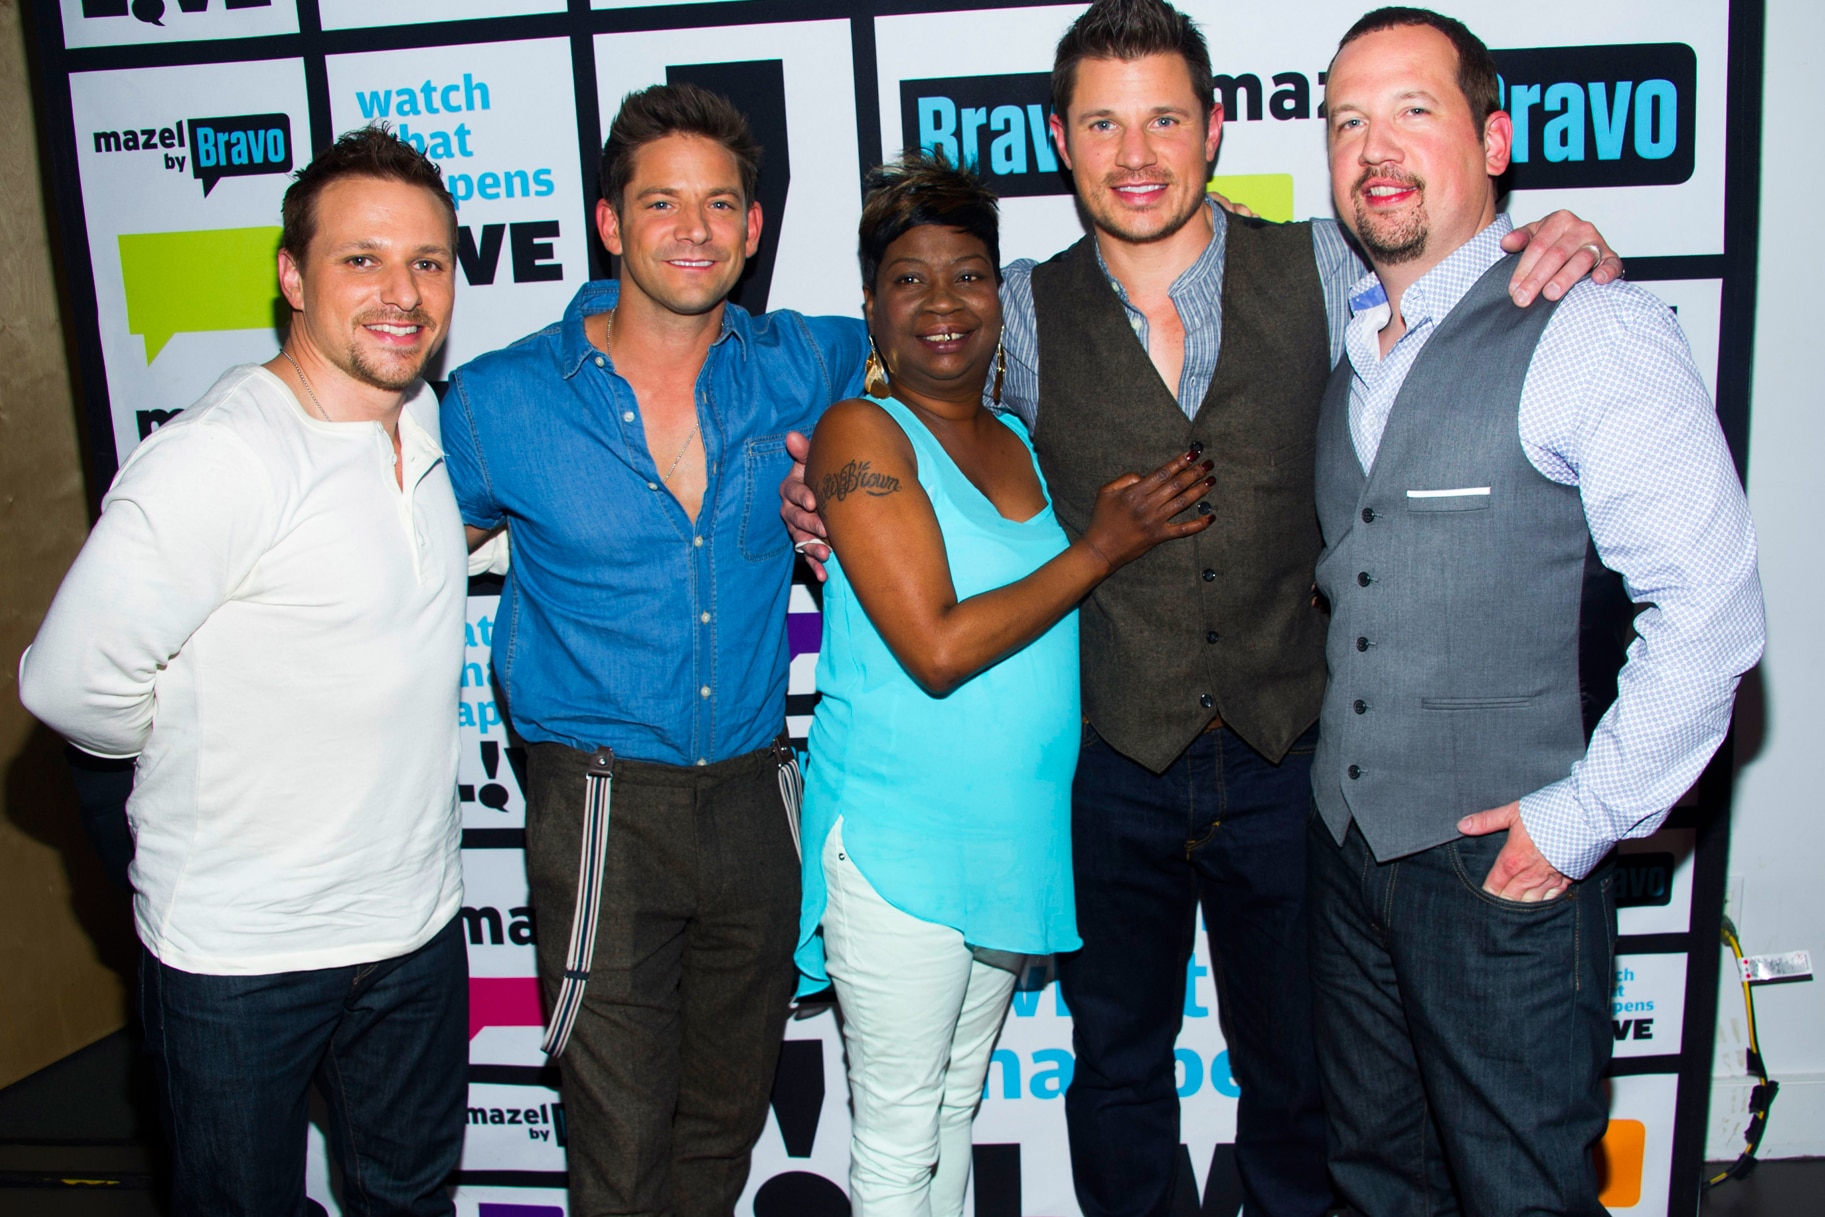 98 degrees chippendales